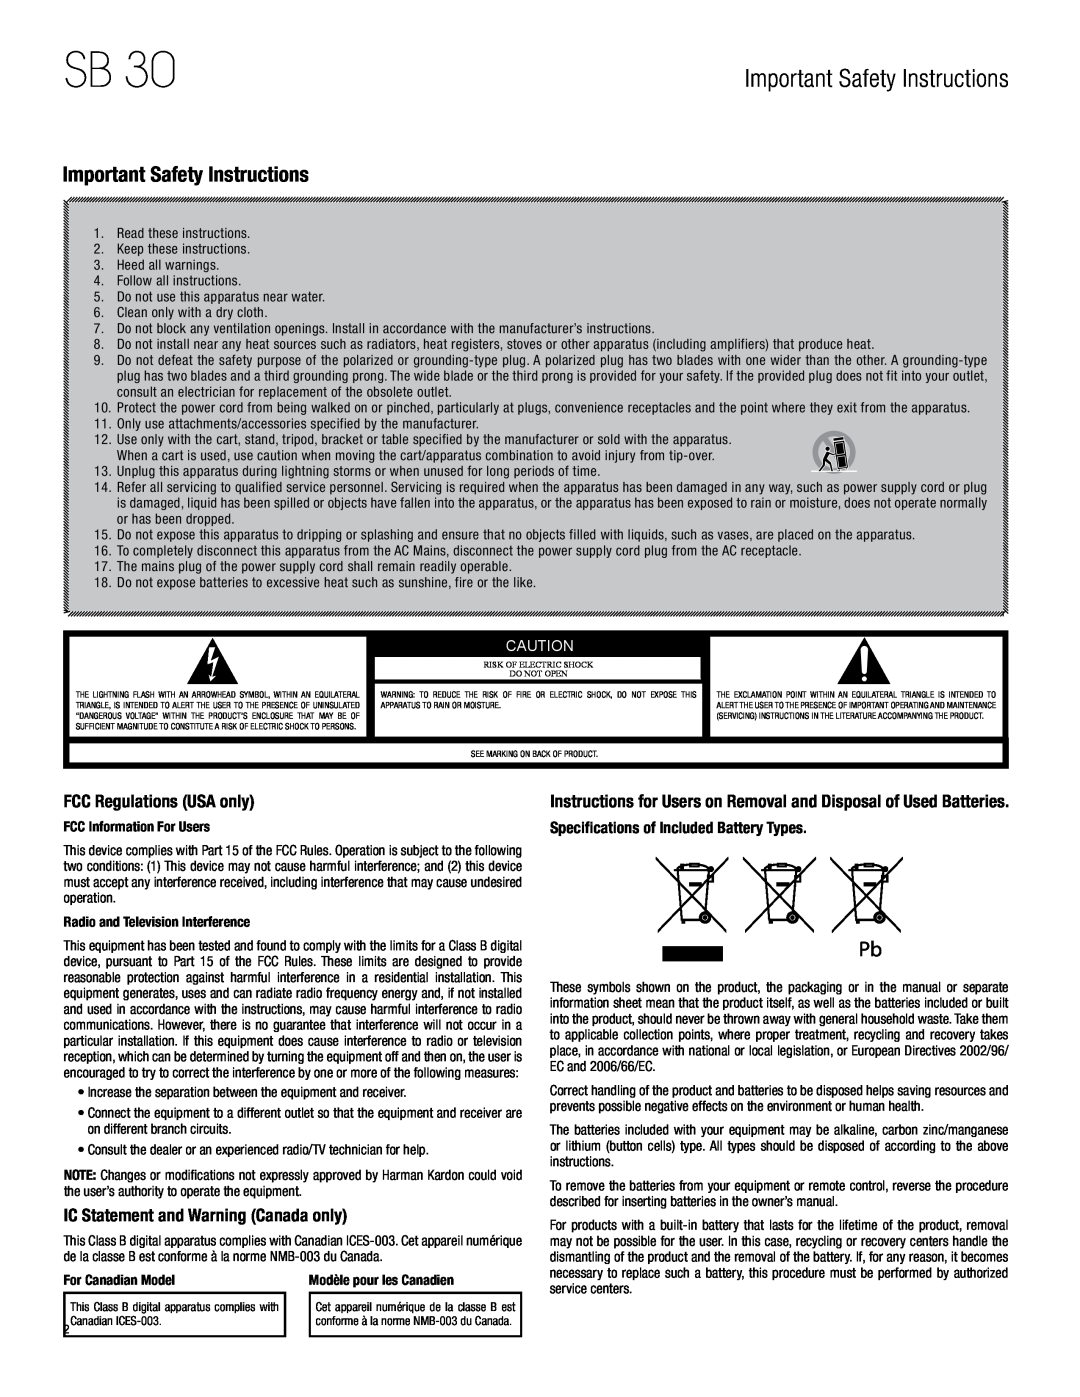 Harman-Kardon SB 30 Important Safety Instructions, FCC Regulations USA only, IC Statement and Warning Canada only 